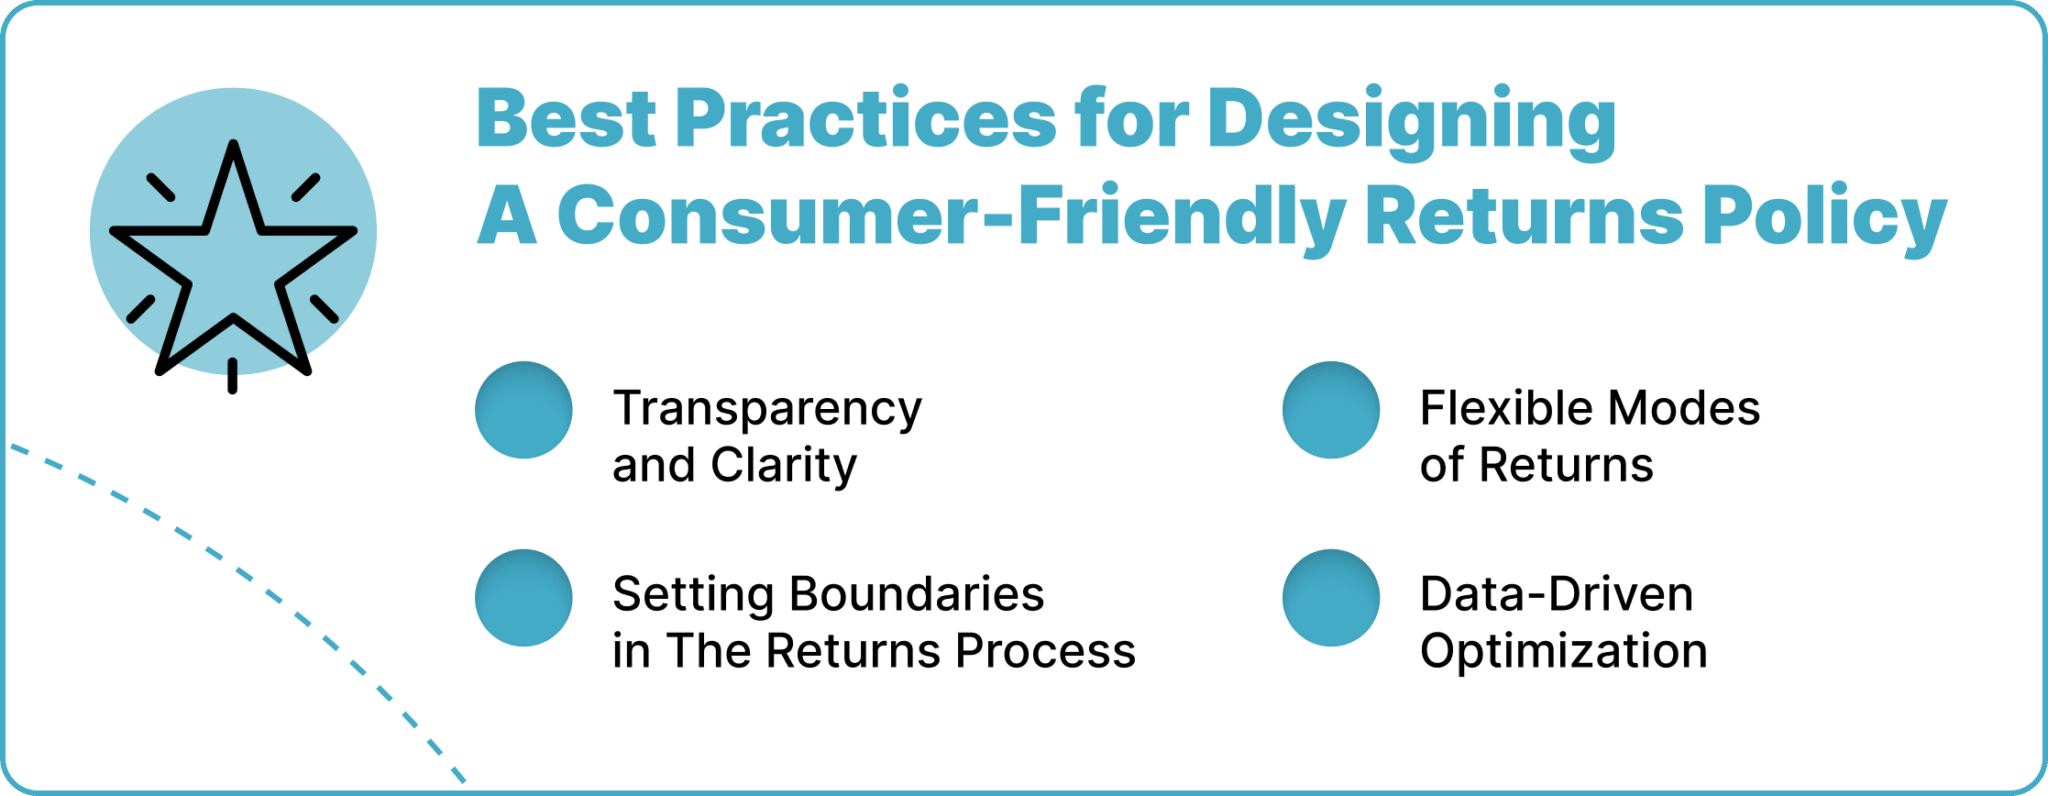 Best Practices for Designing A Consumer-Friendly Returns Policy